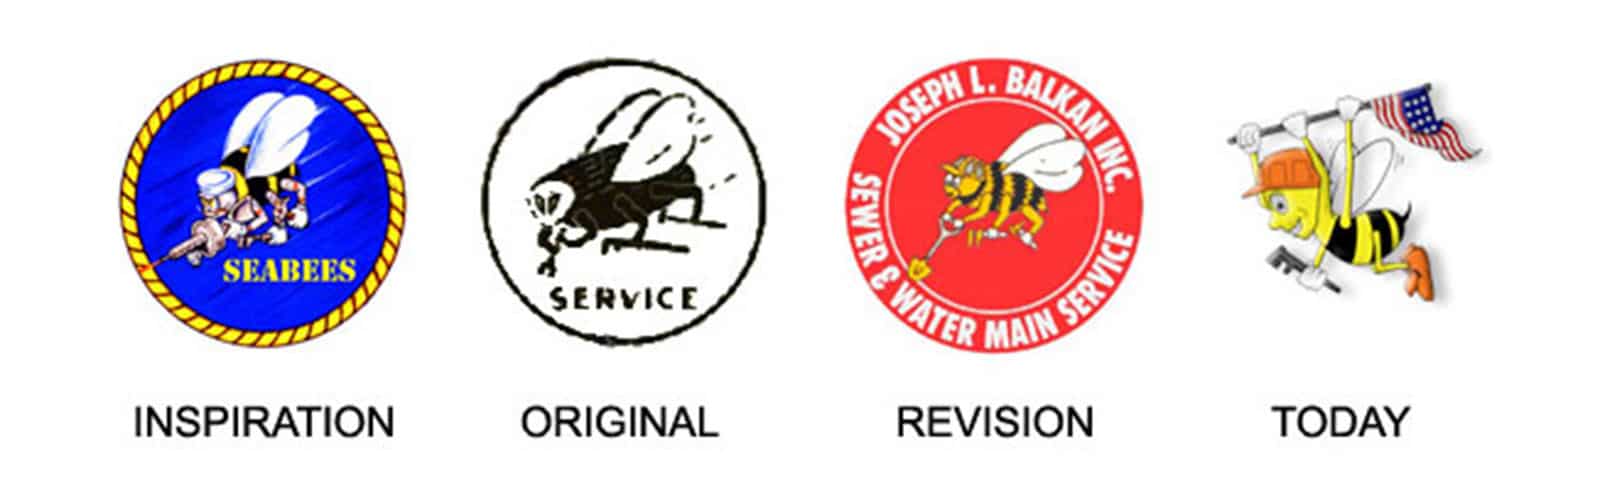 NYC sewer line contrator logos